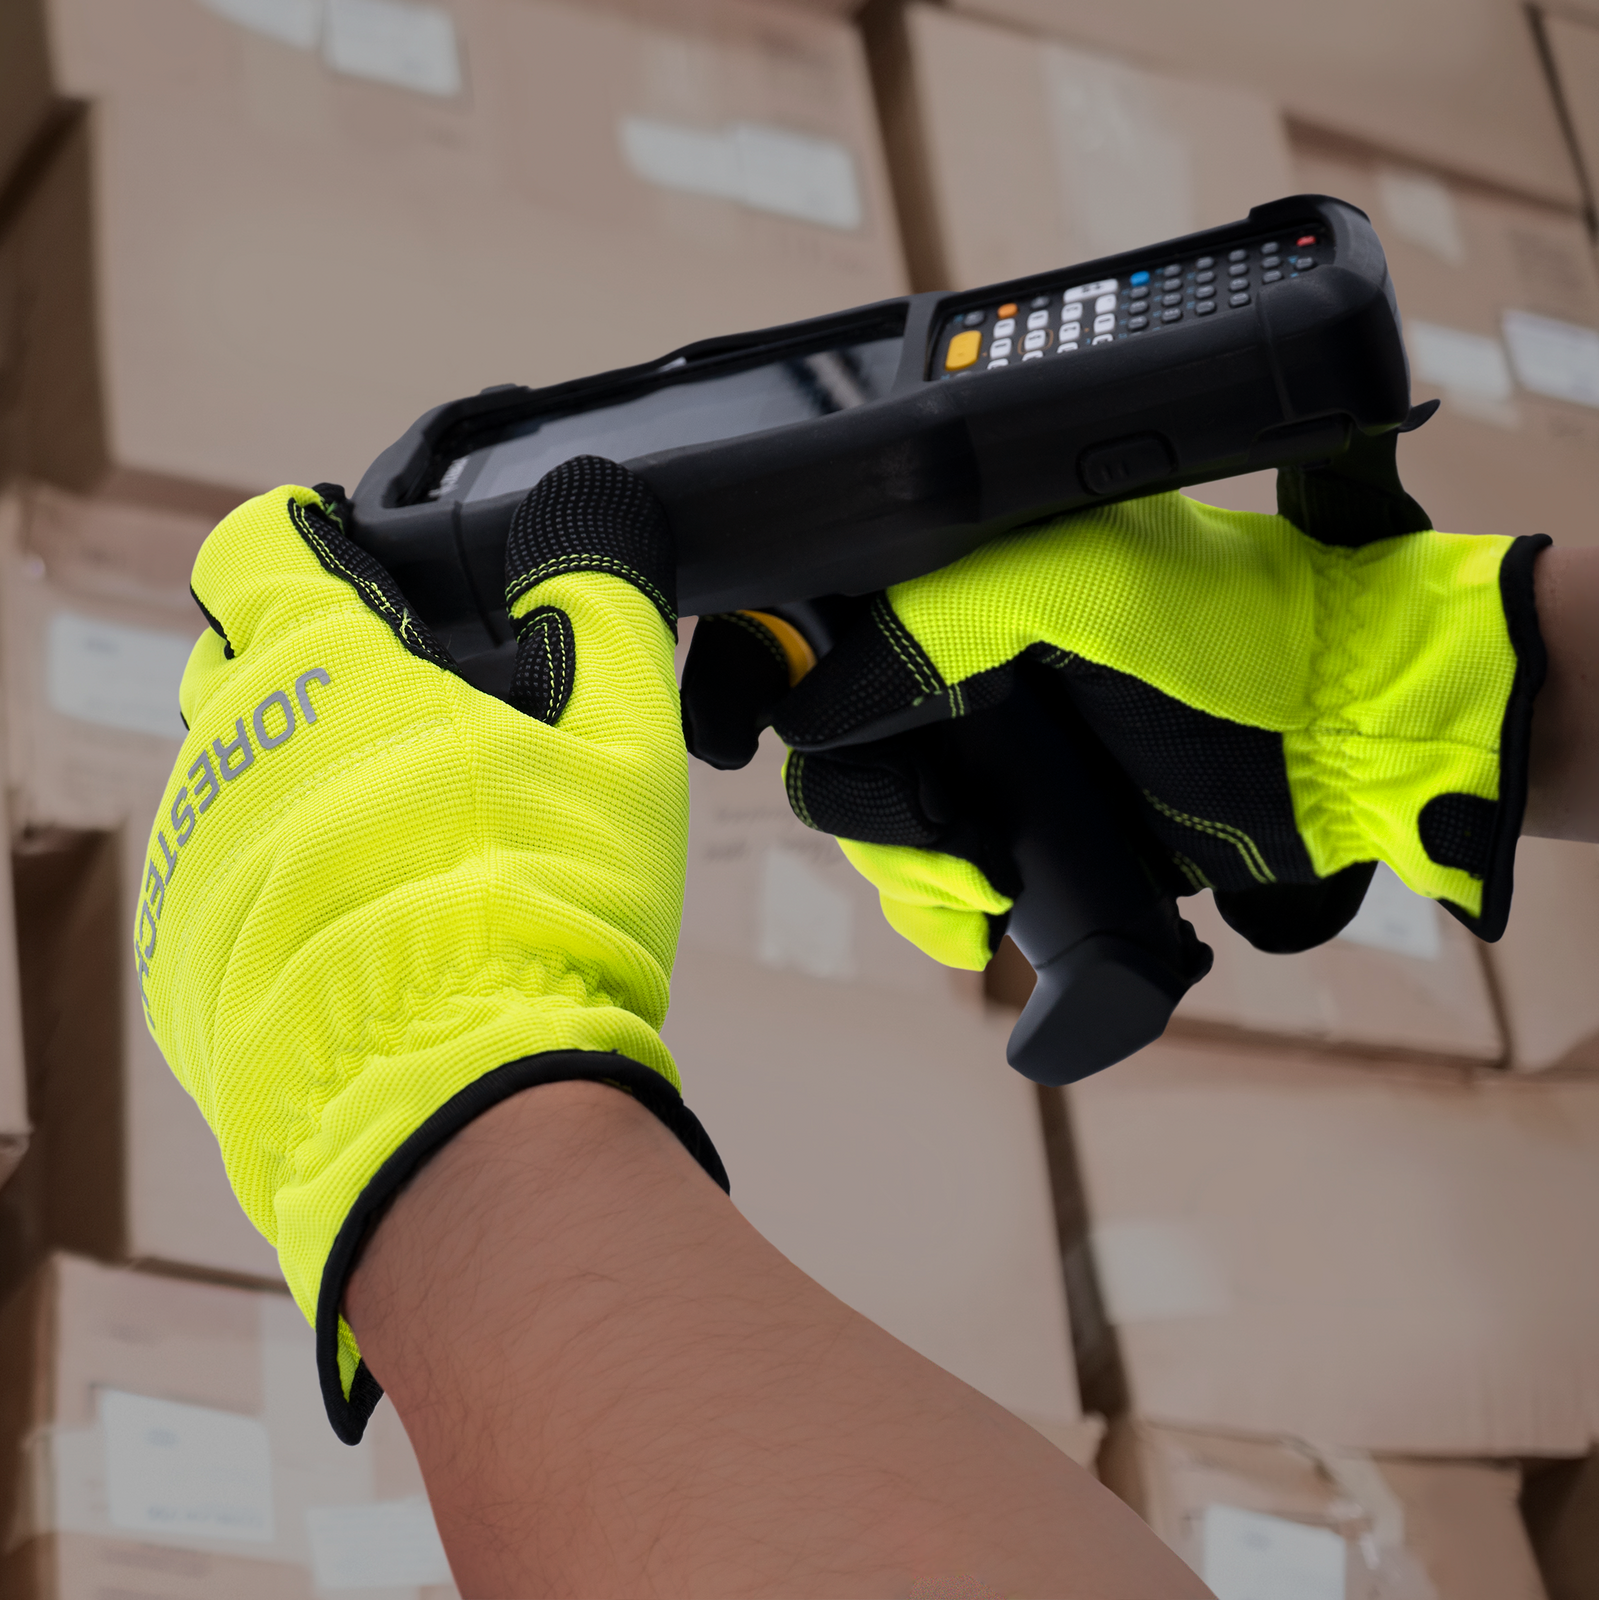 A worker operating a bar code finder in a warehouse while wearing the touchscreen safety work gloves